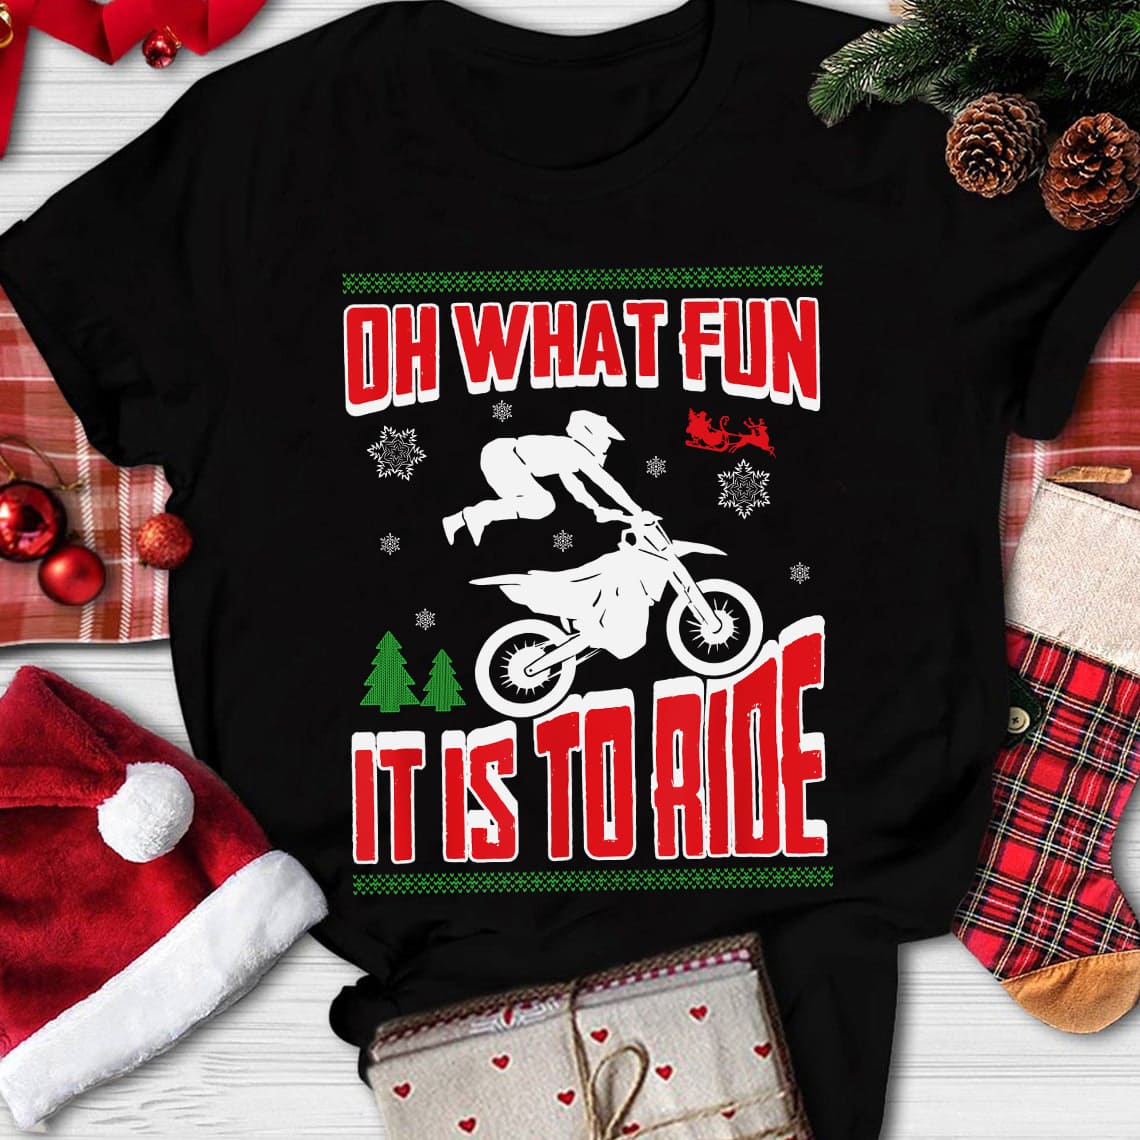 Oh what fun It is to ride - Man riding motorbike, Christmas gift for biker